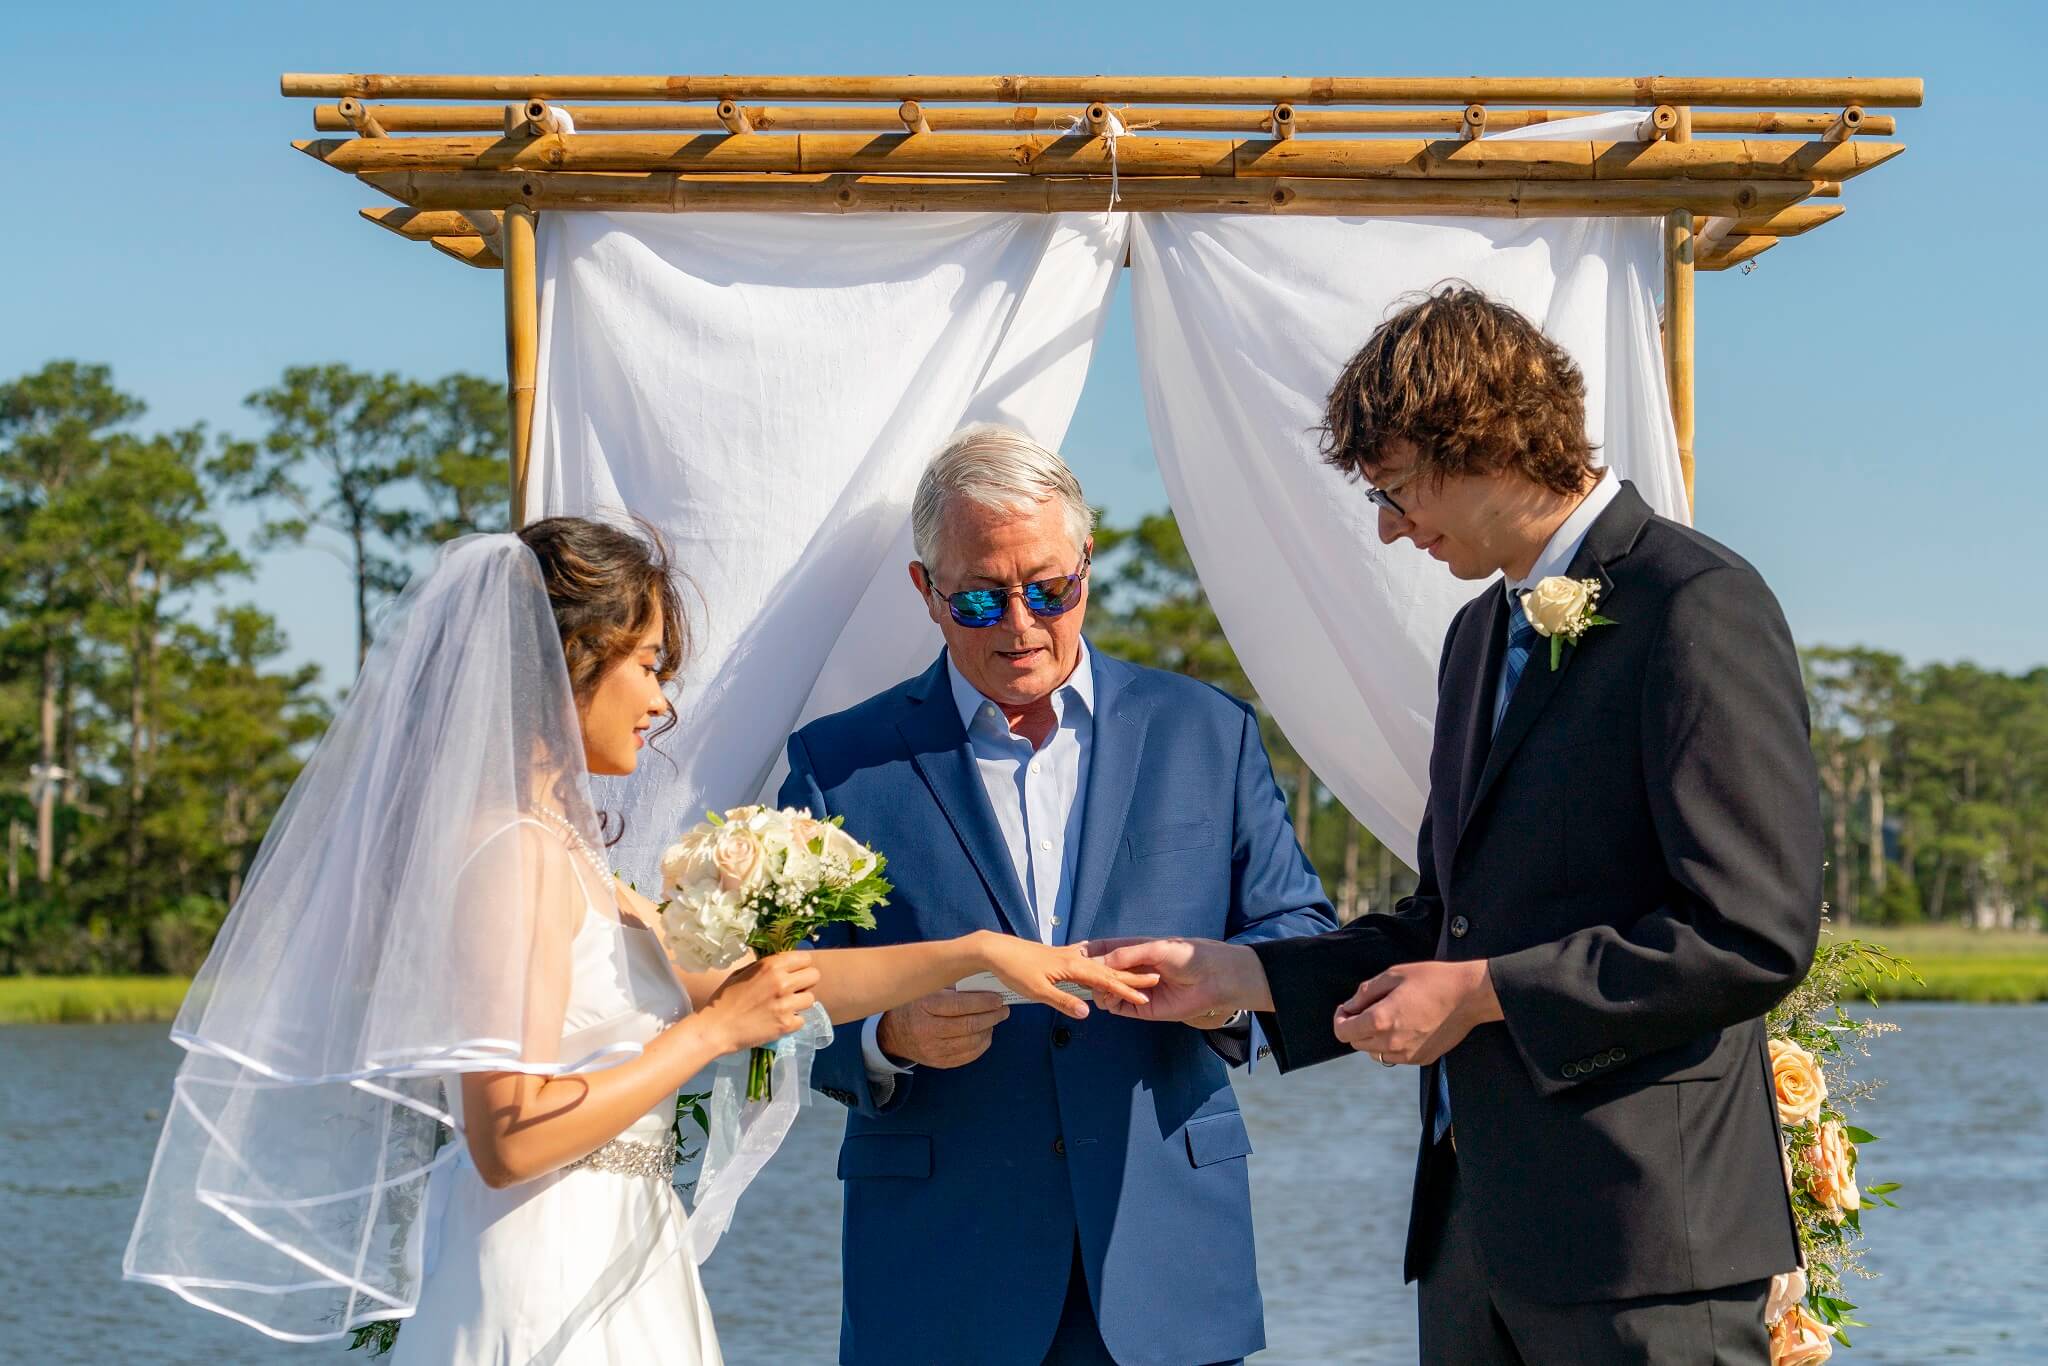 Bride and groom exchanging rings at the alter by the water